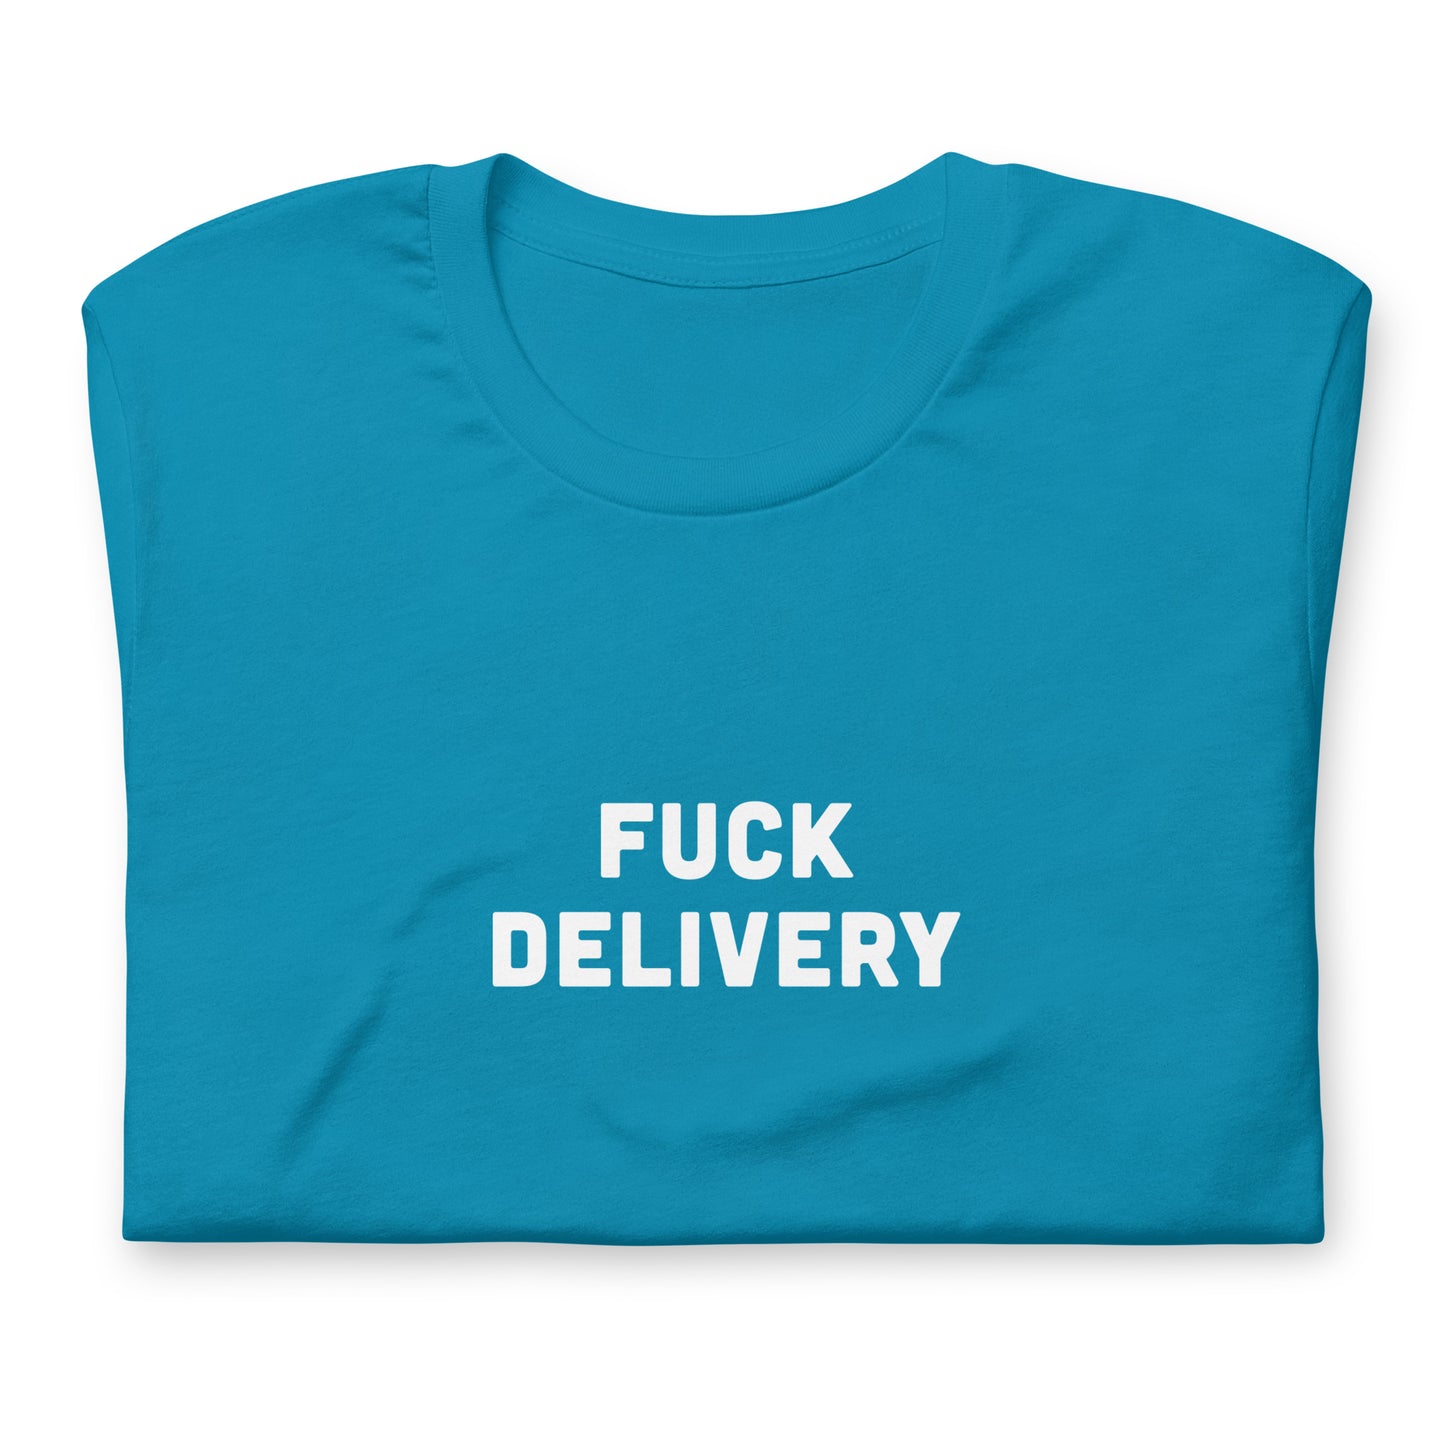 Fuck Delivery T-Shirt Size 2XL Color Navy